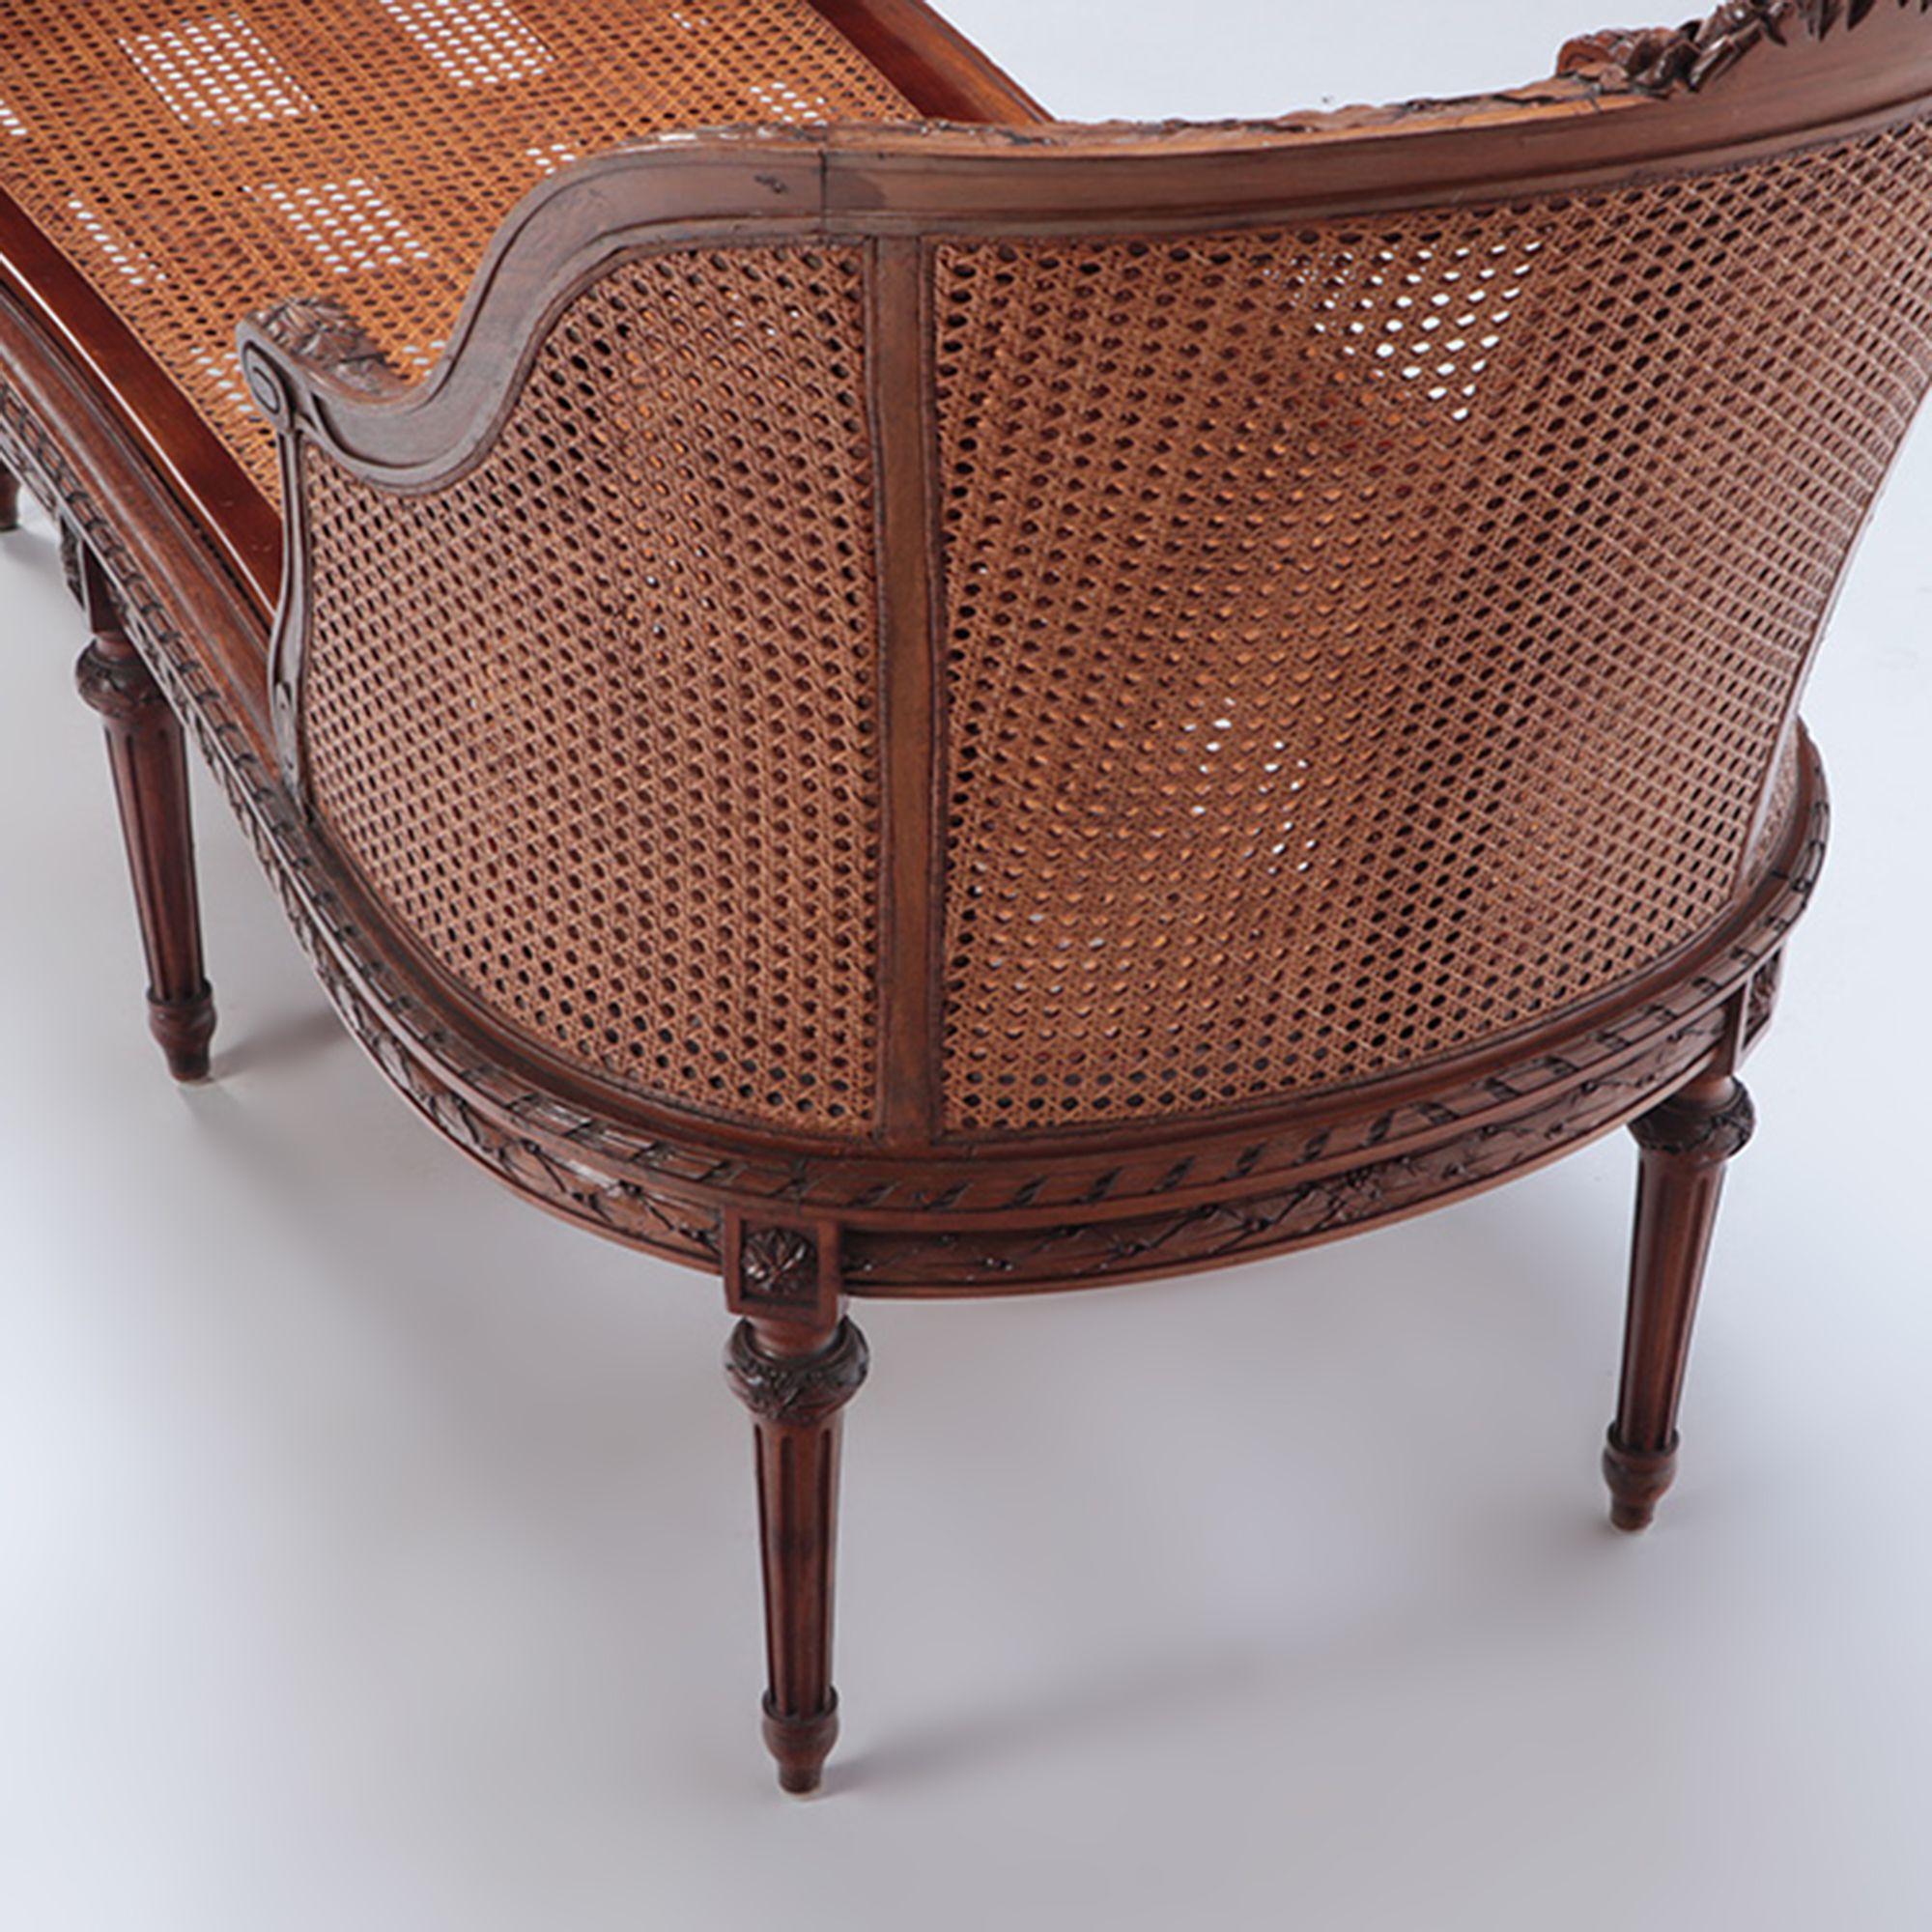 French Carved Walnut Chaise Lounge in the Louis XVI Style, circa 1900 For Sale 3